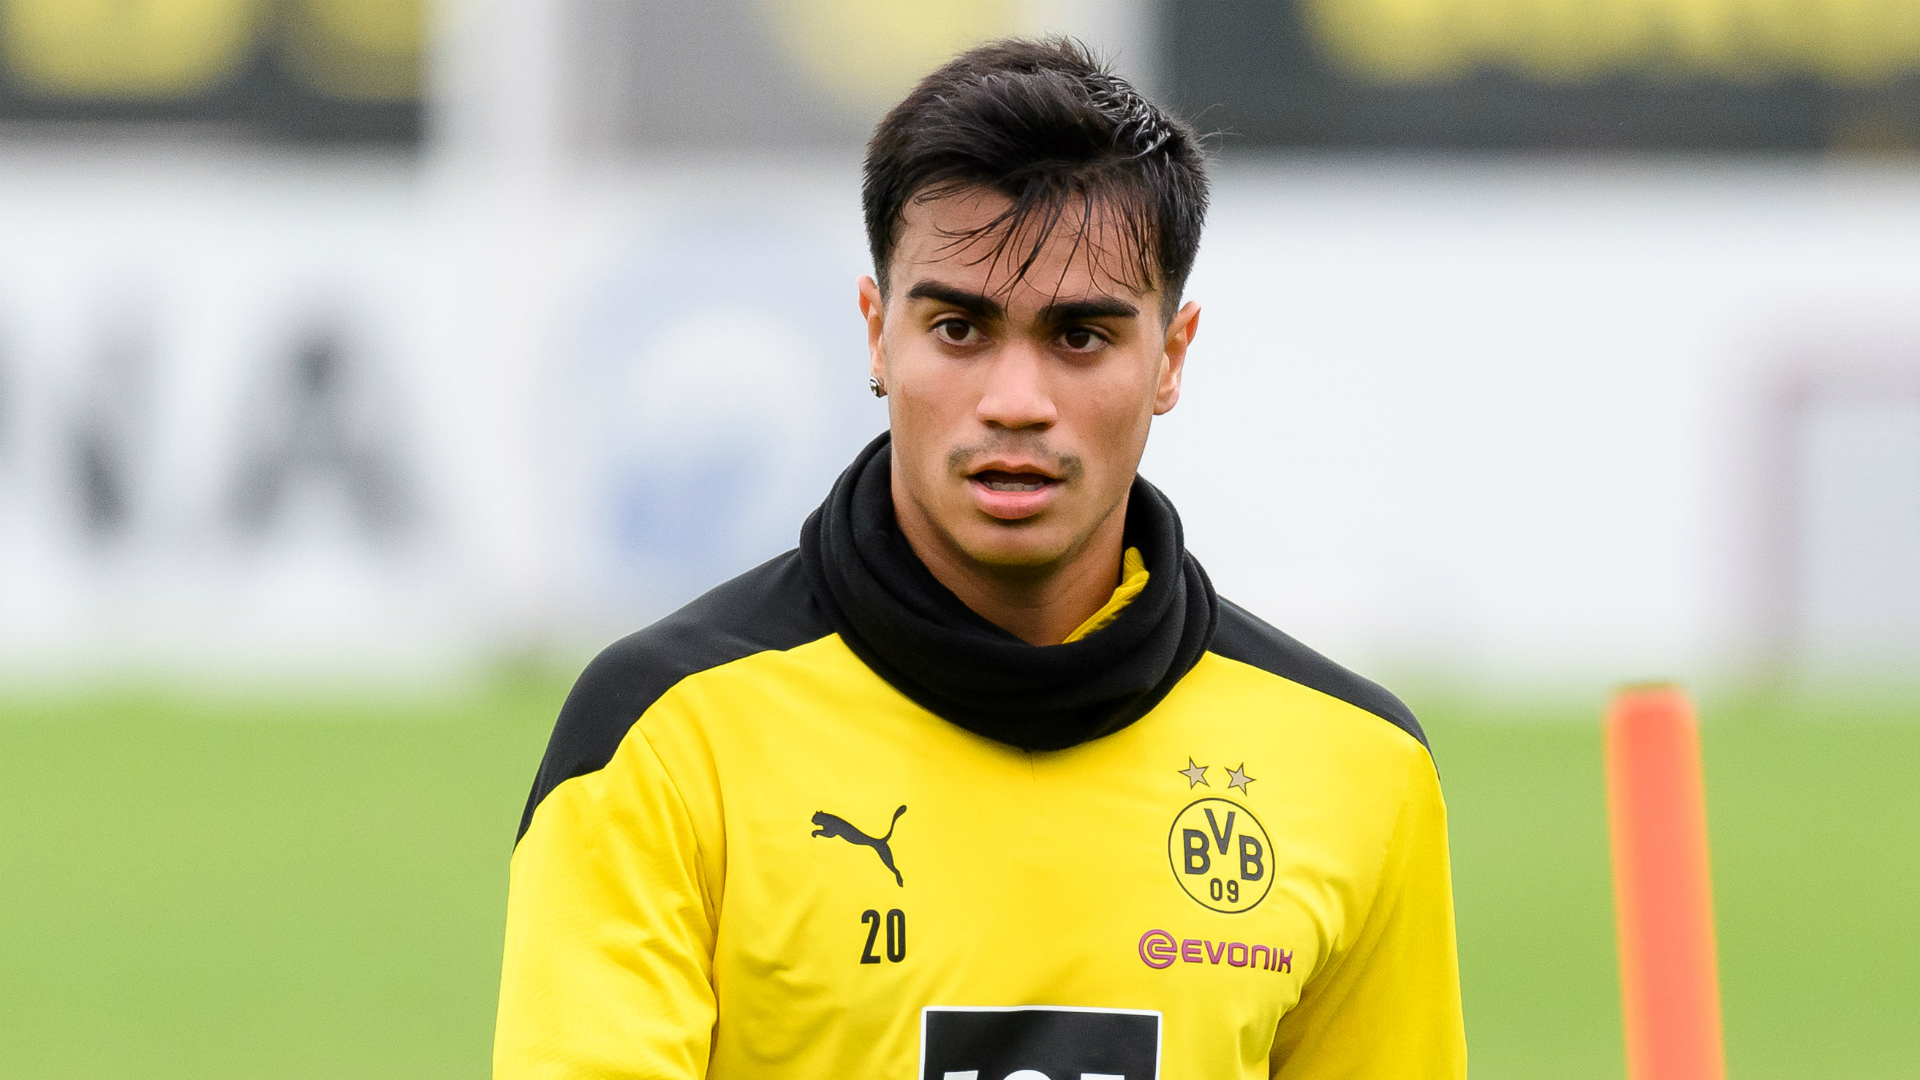 On-loan Real Madrid midfielder Reinier has featured seven times for Borussia Dortmund this term but has now been ruled out with coronavirus.